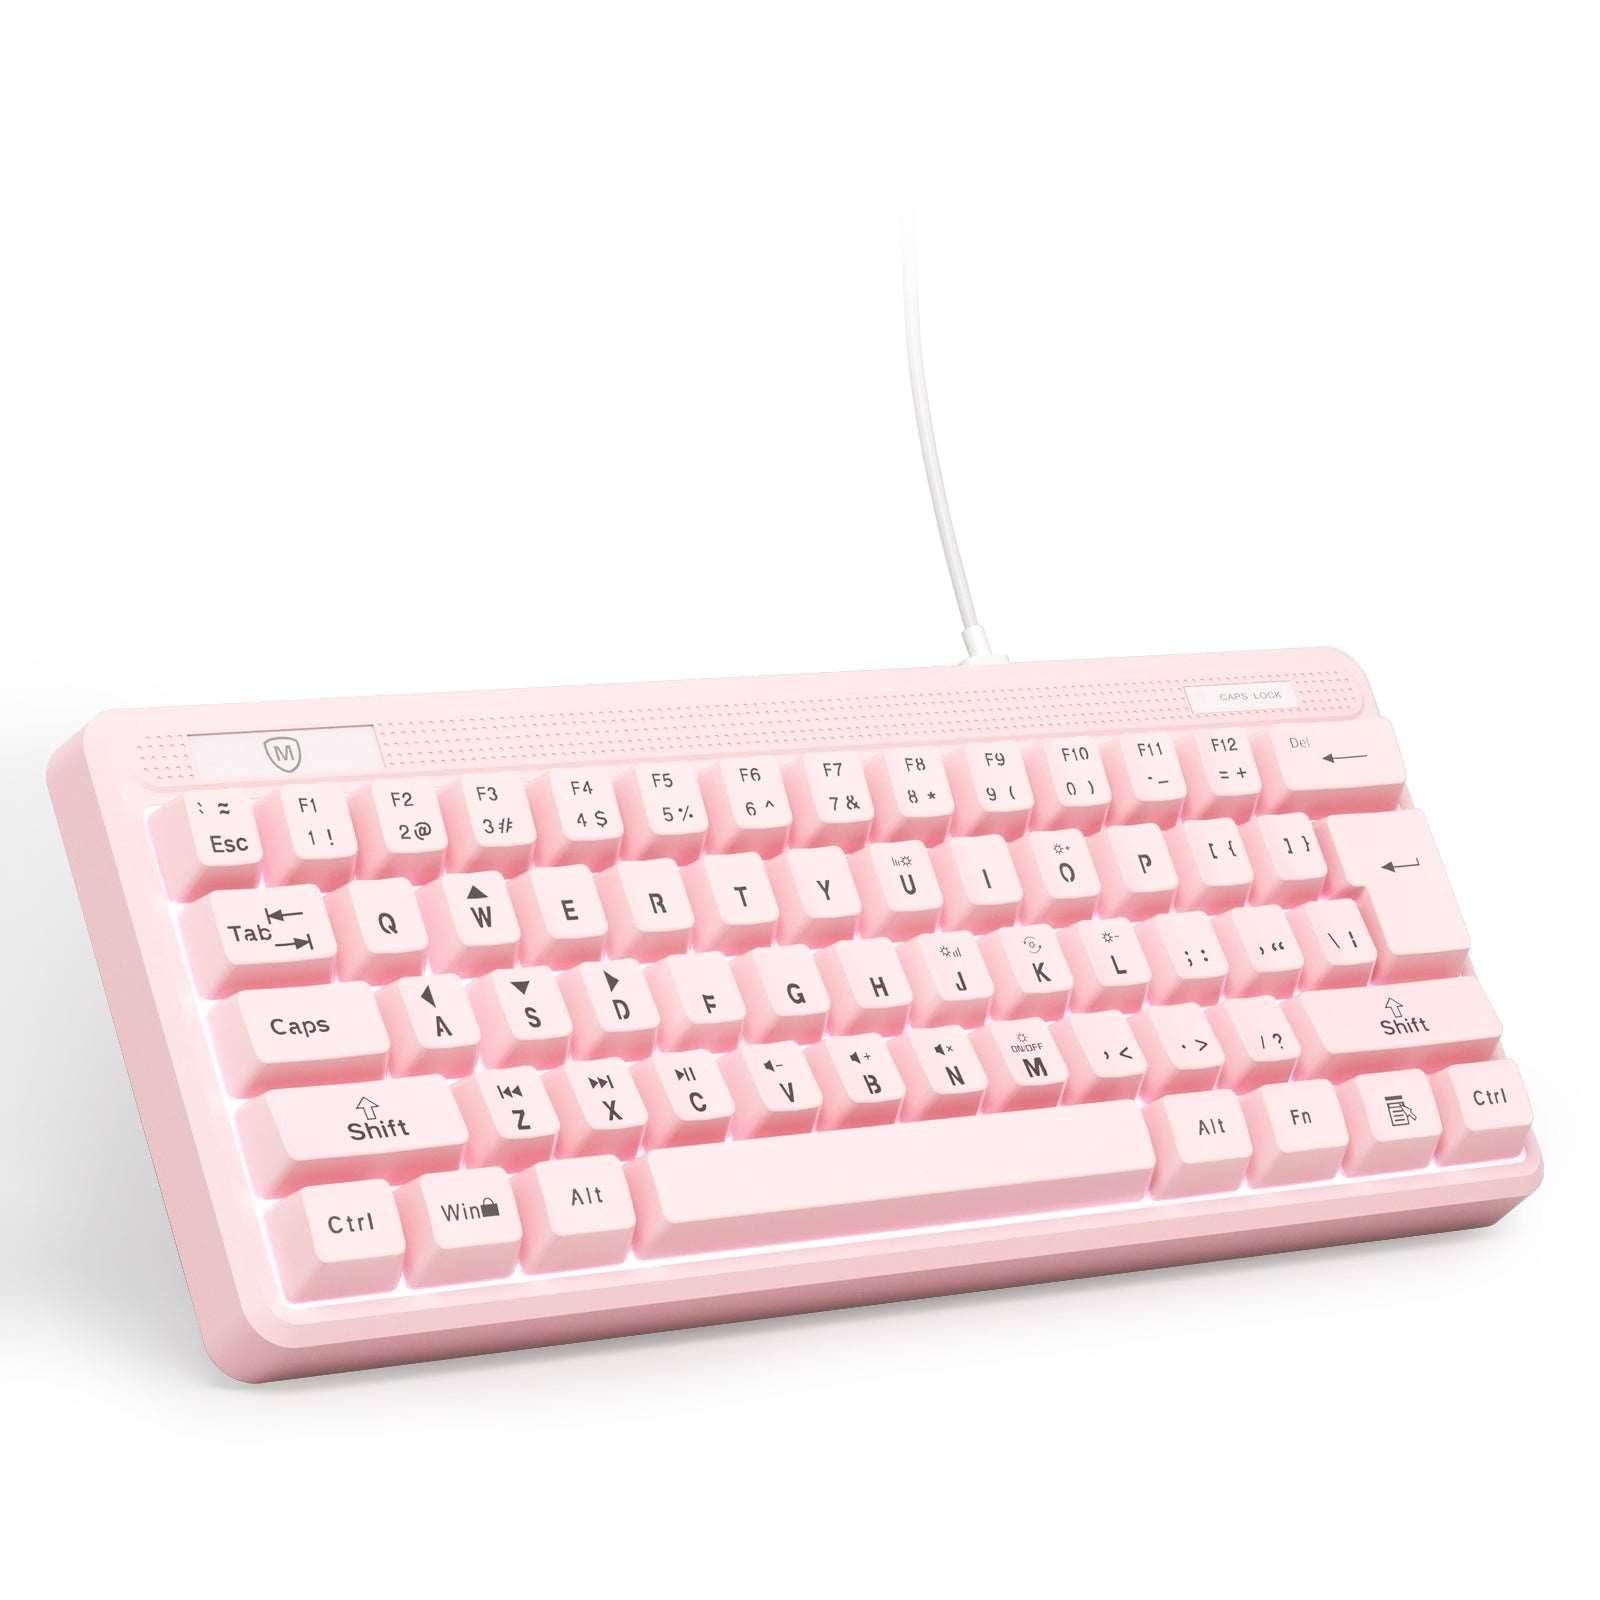 Mini Backlit Wired Keyboard for Computer AK-100 pink